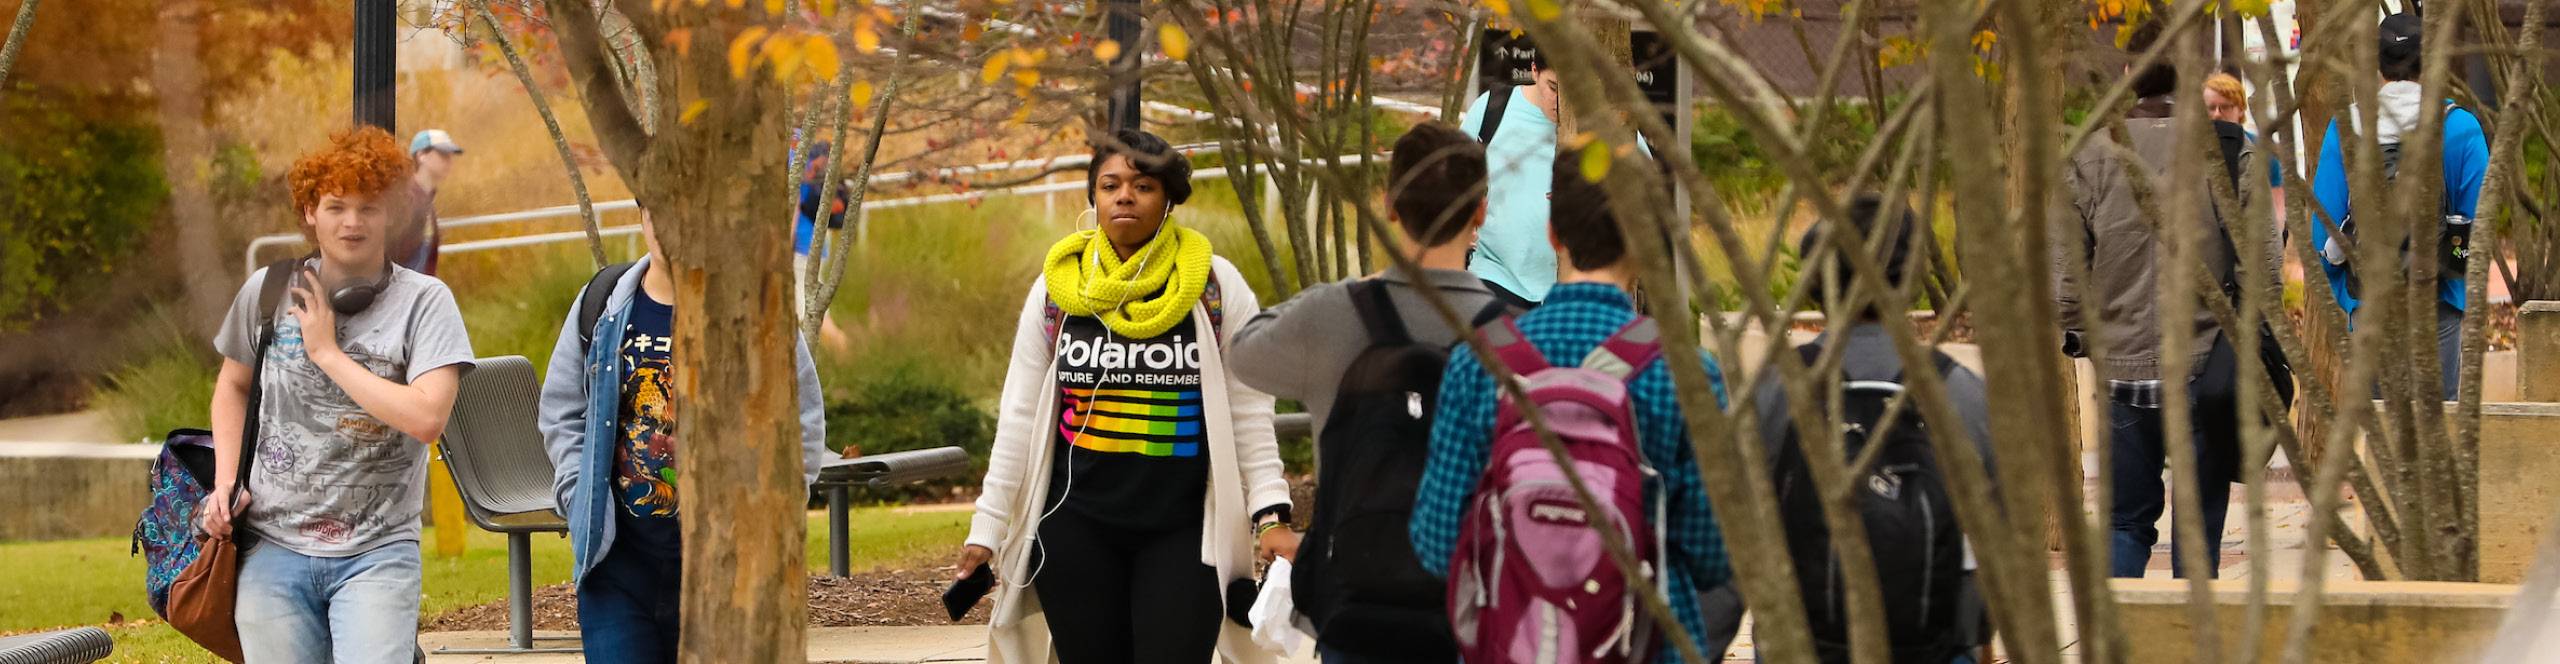 Students on campus, fall 2019